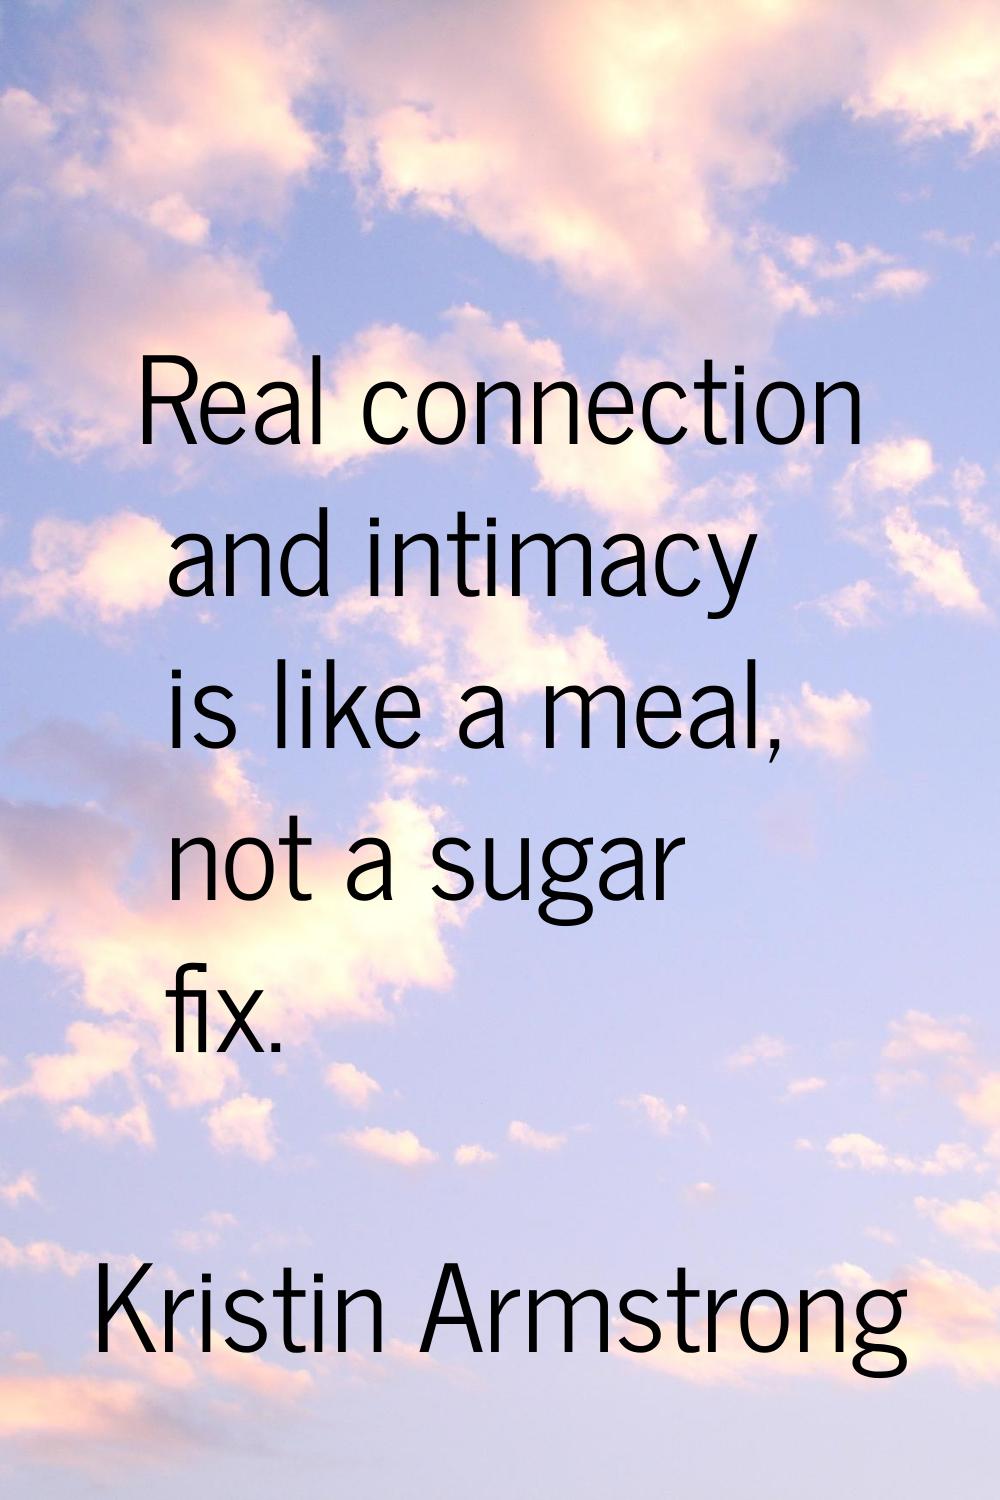 Real connection and intimacy is like a meal, not a sugar fix.